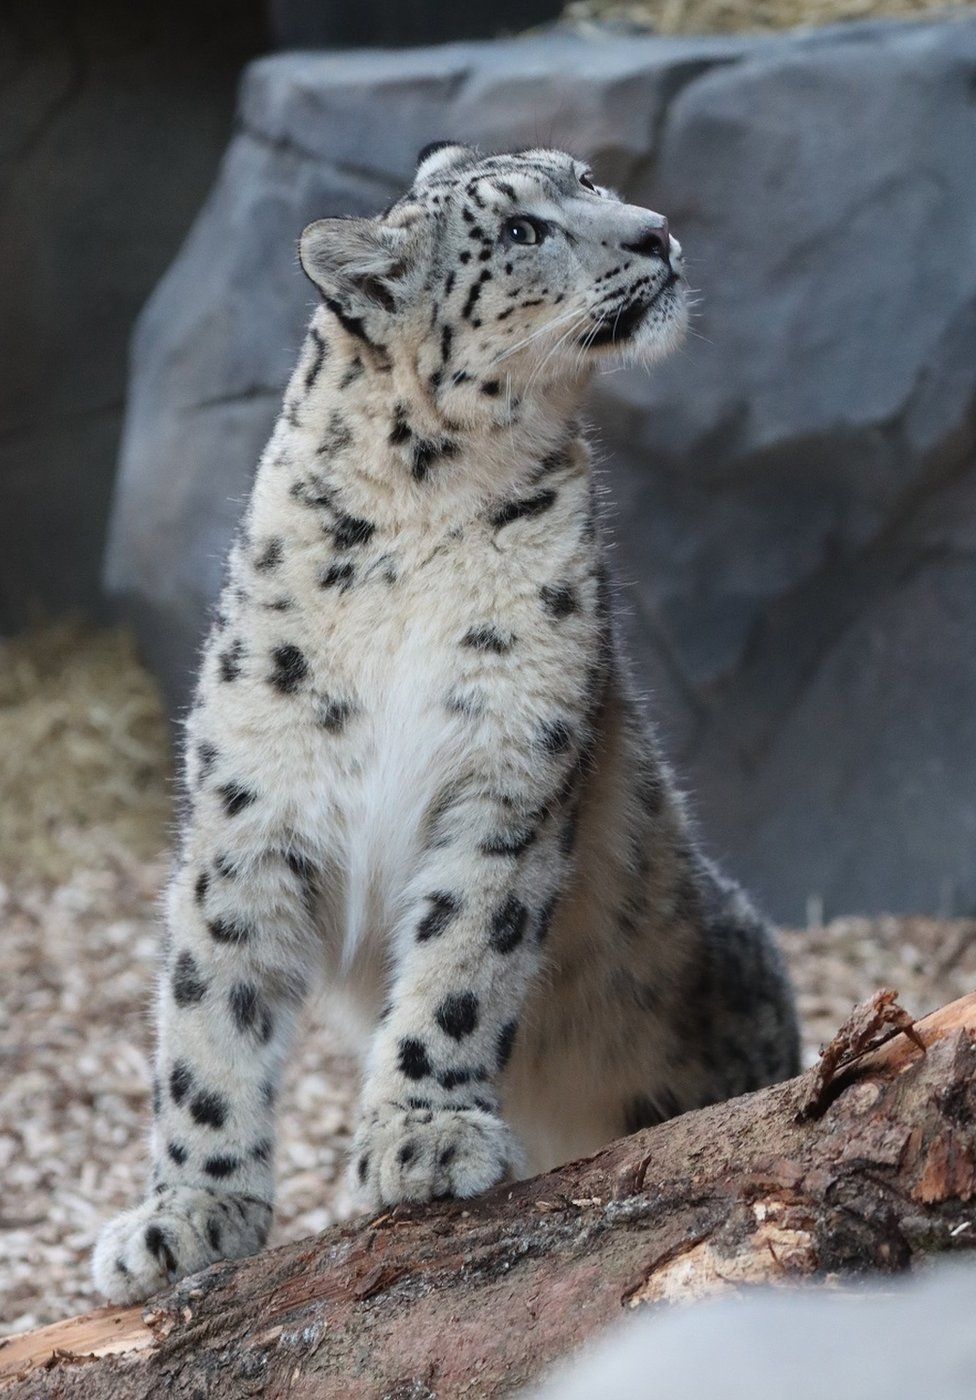 Zoo welcomes two snow leopards in hopes they'll have cubs together, National News